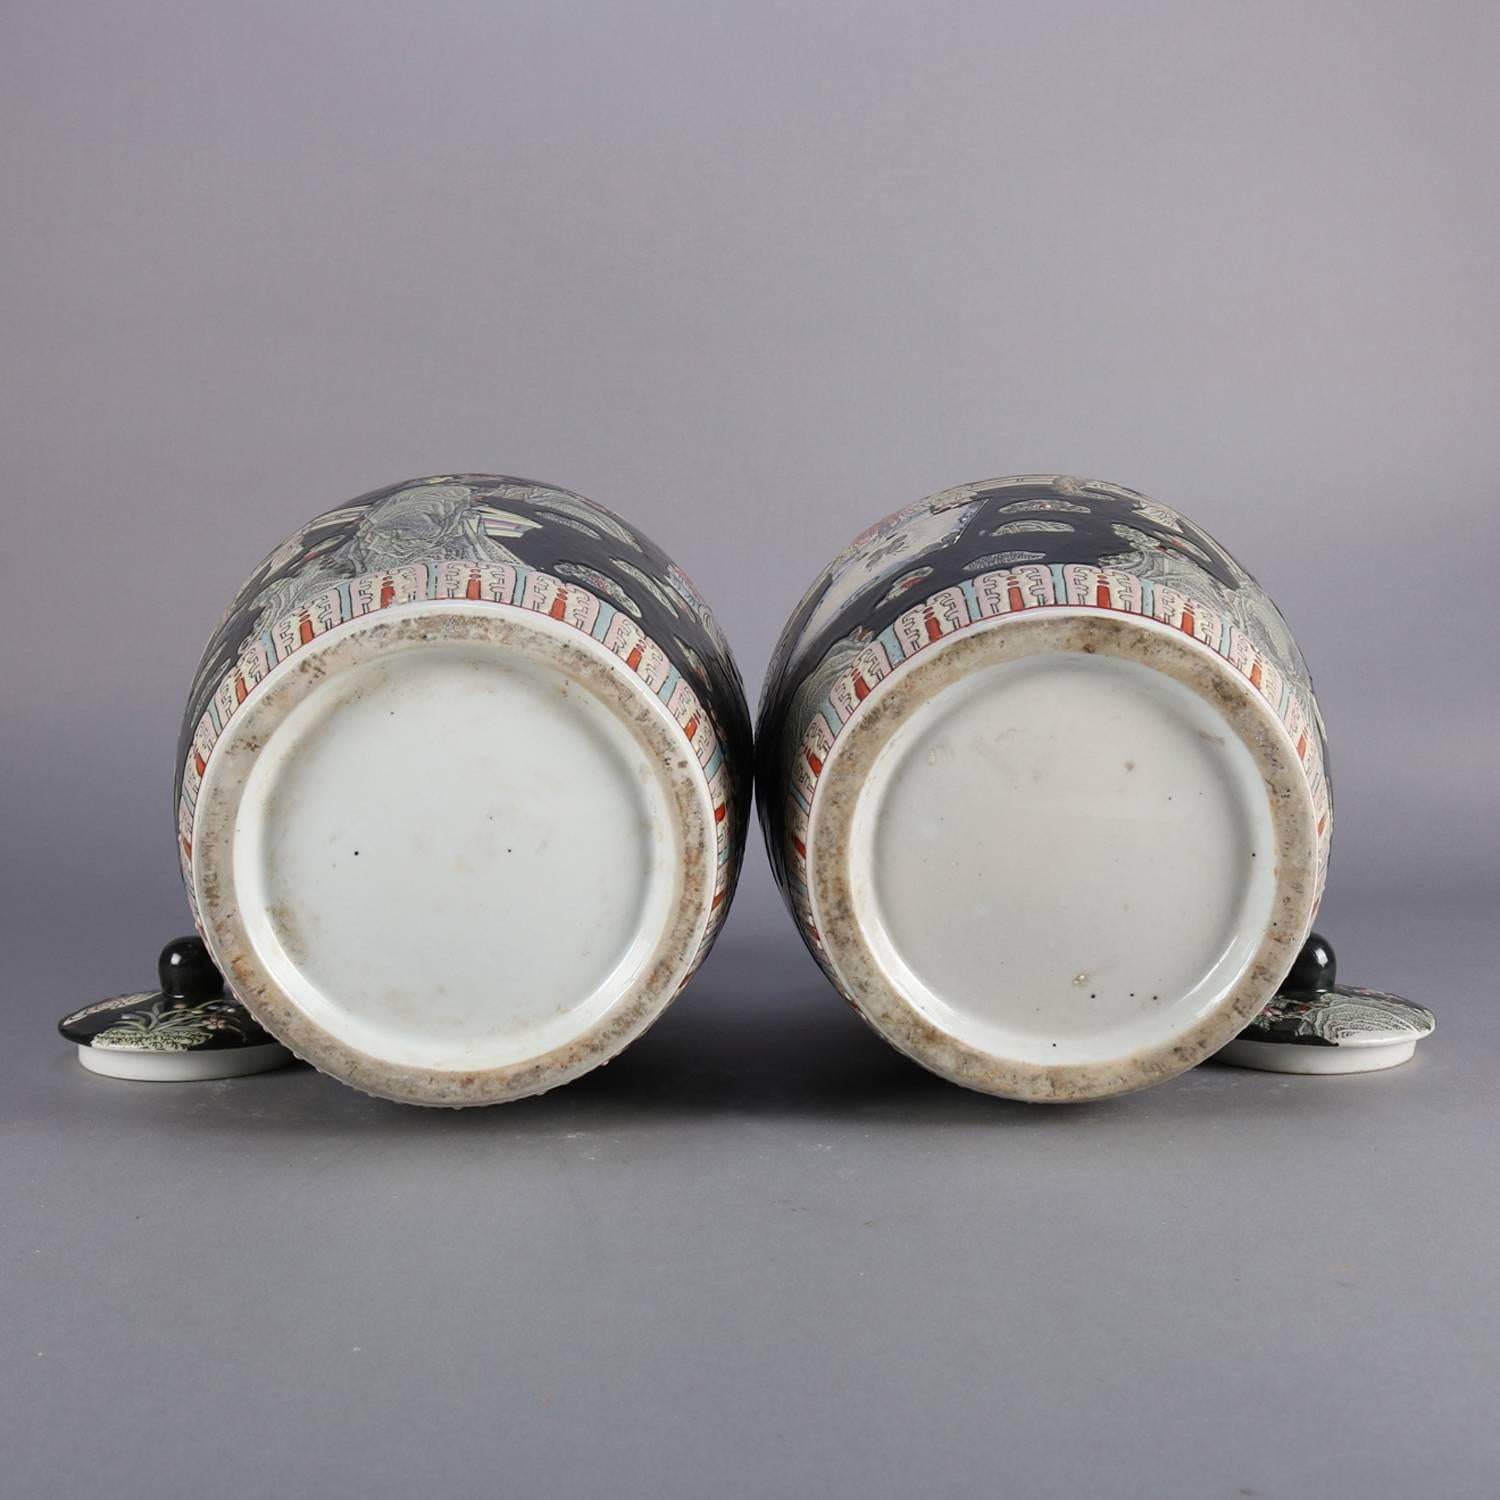 Glazed Pair of Chinese Hand-Painted Porcelain Covered Jars, Figures in Garden